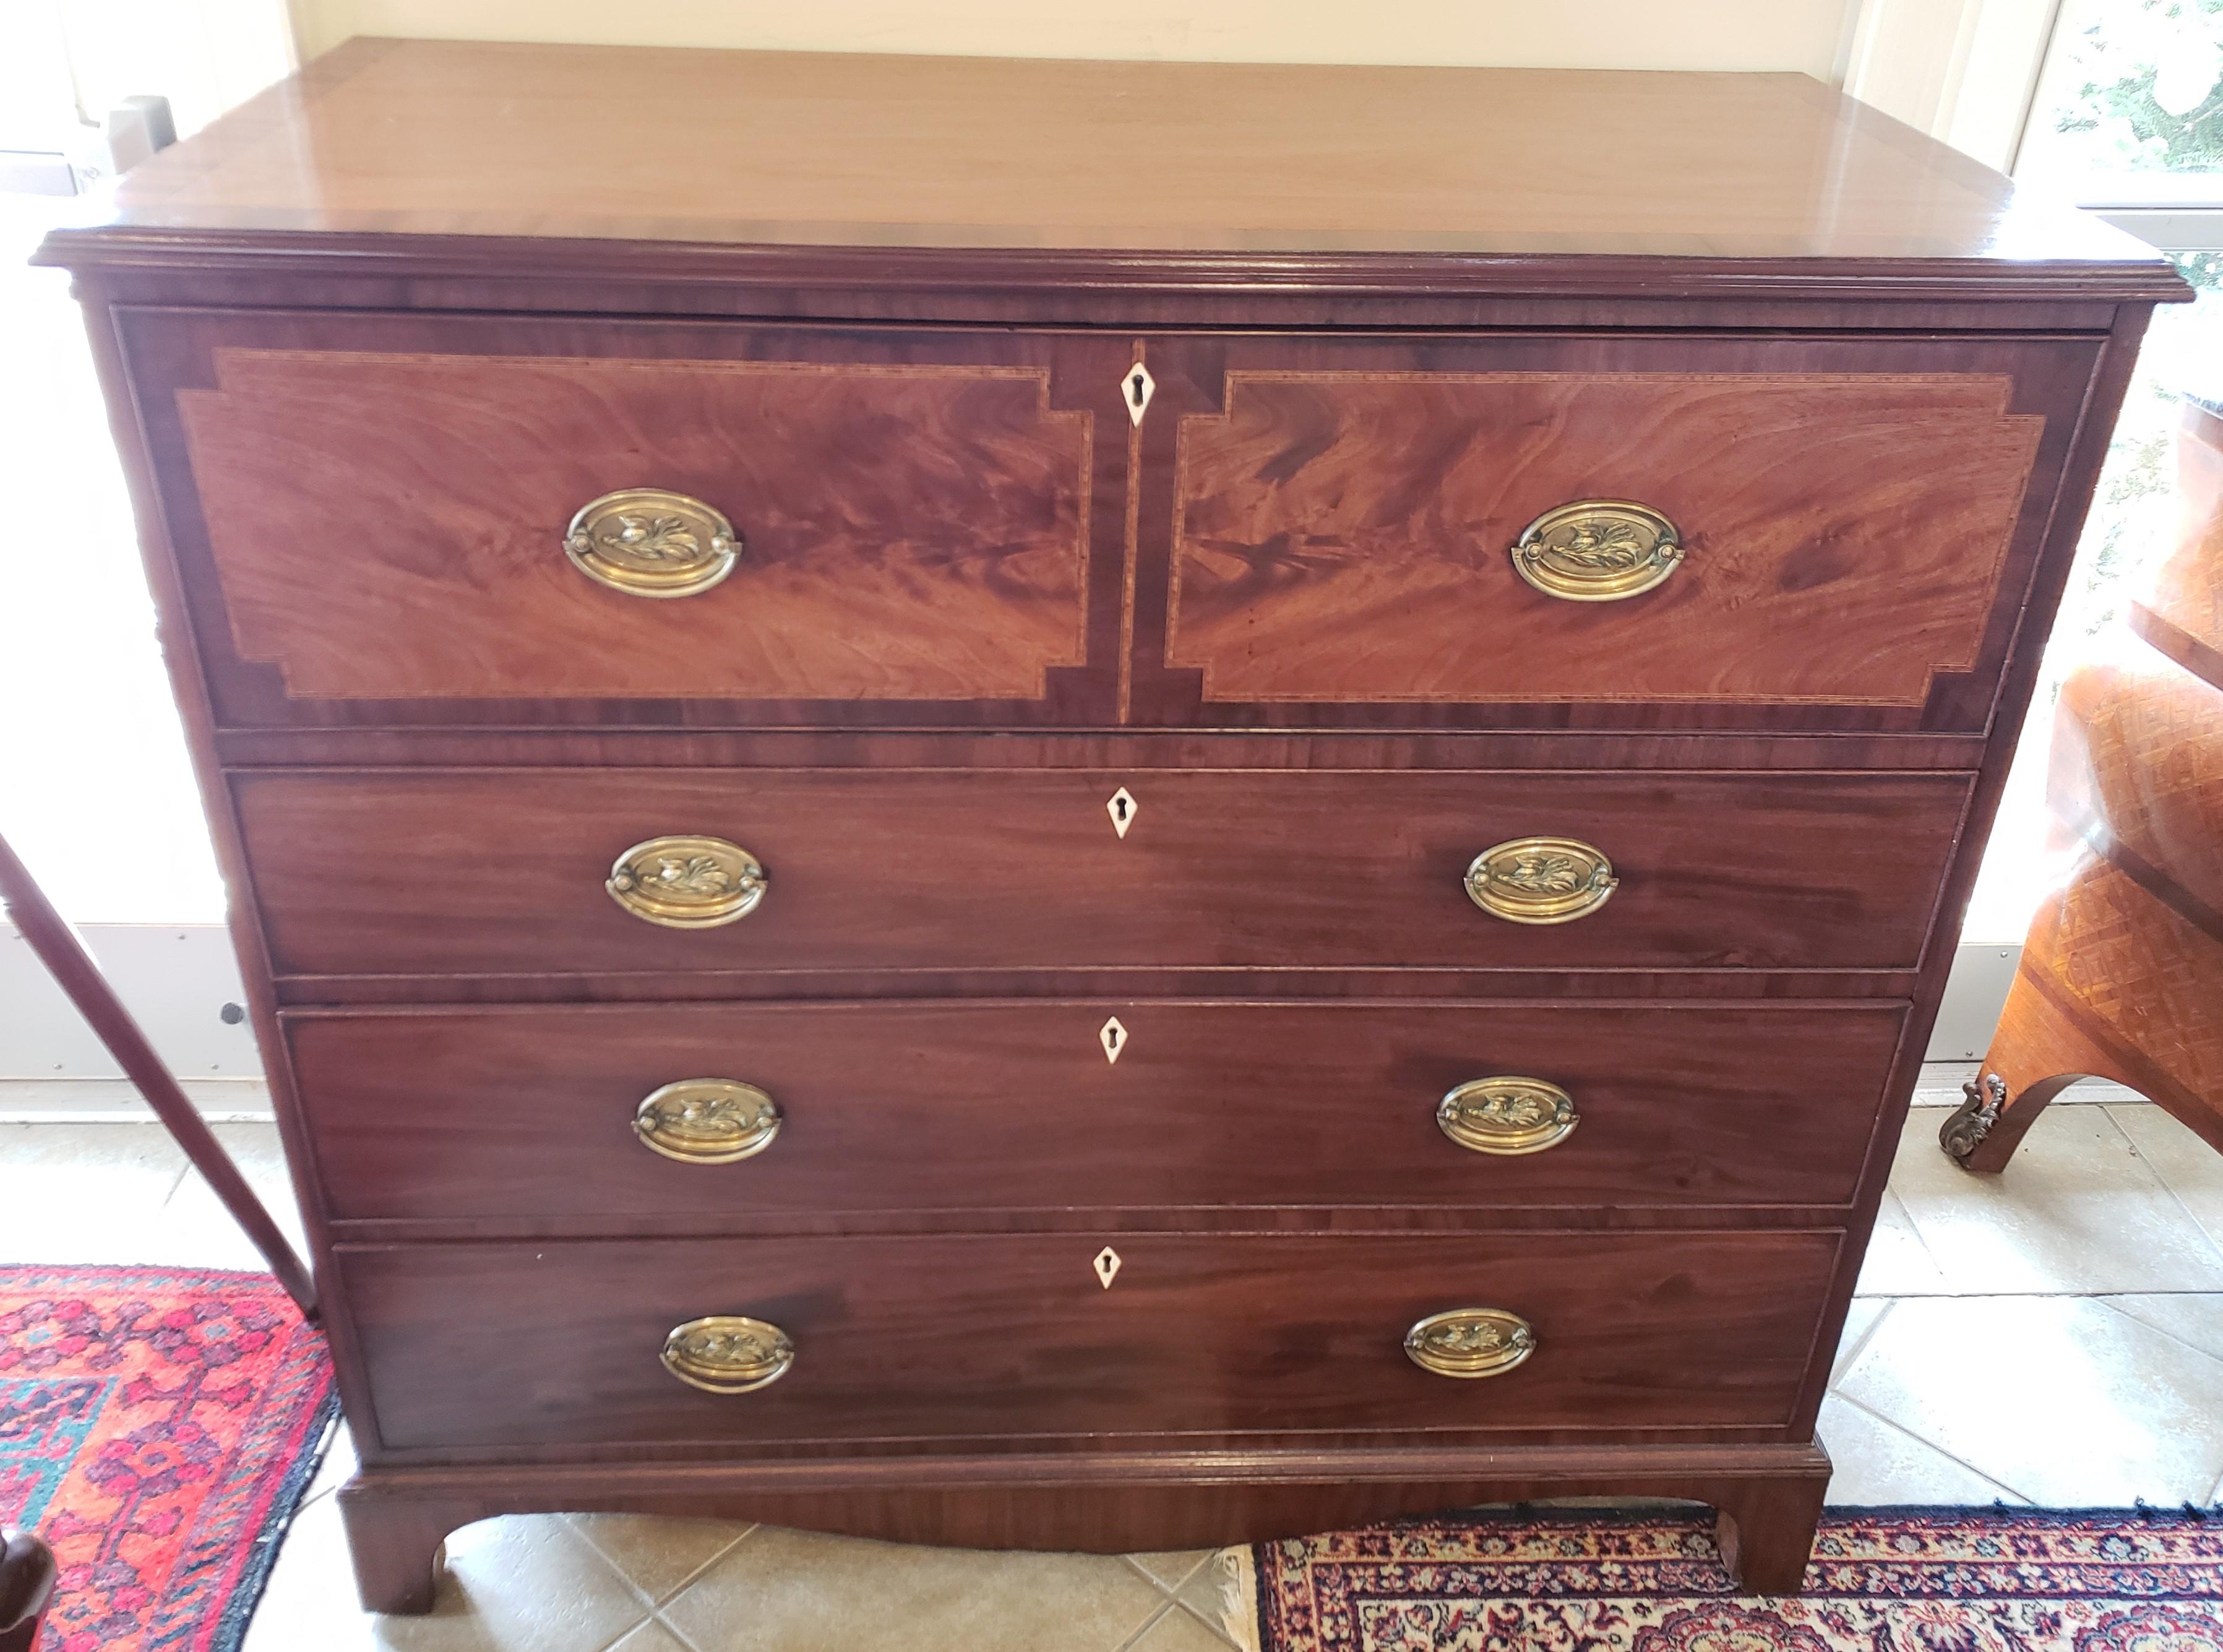 Georgian mahogany butler secretaire with crossbanding and inlay. Behind the drop front, the interior is fitted with numerous smaller drawers with Inlay. The center door features a beautiful inlayed colored urn. The drawers are made of bird's-eye